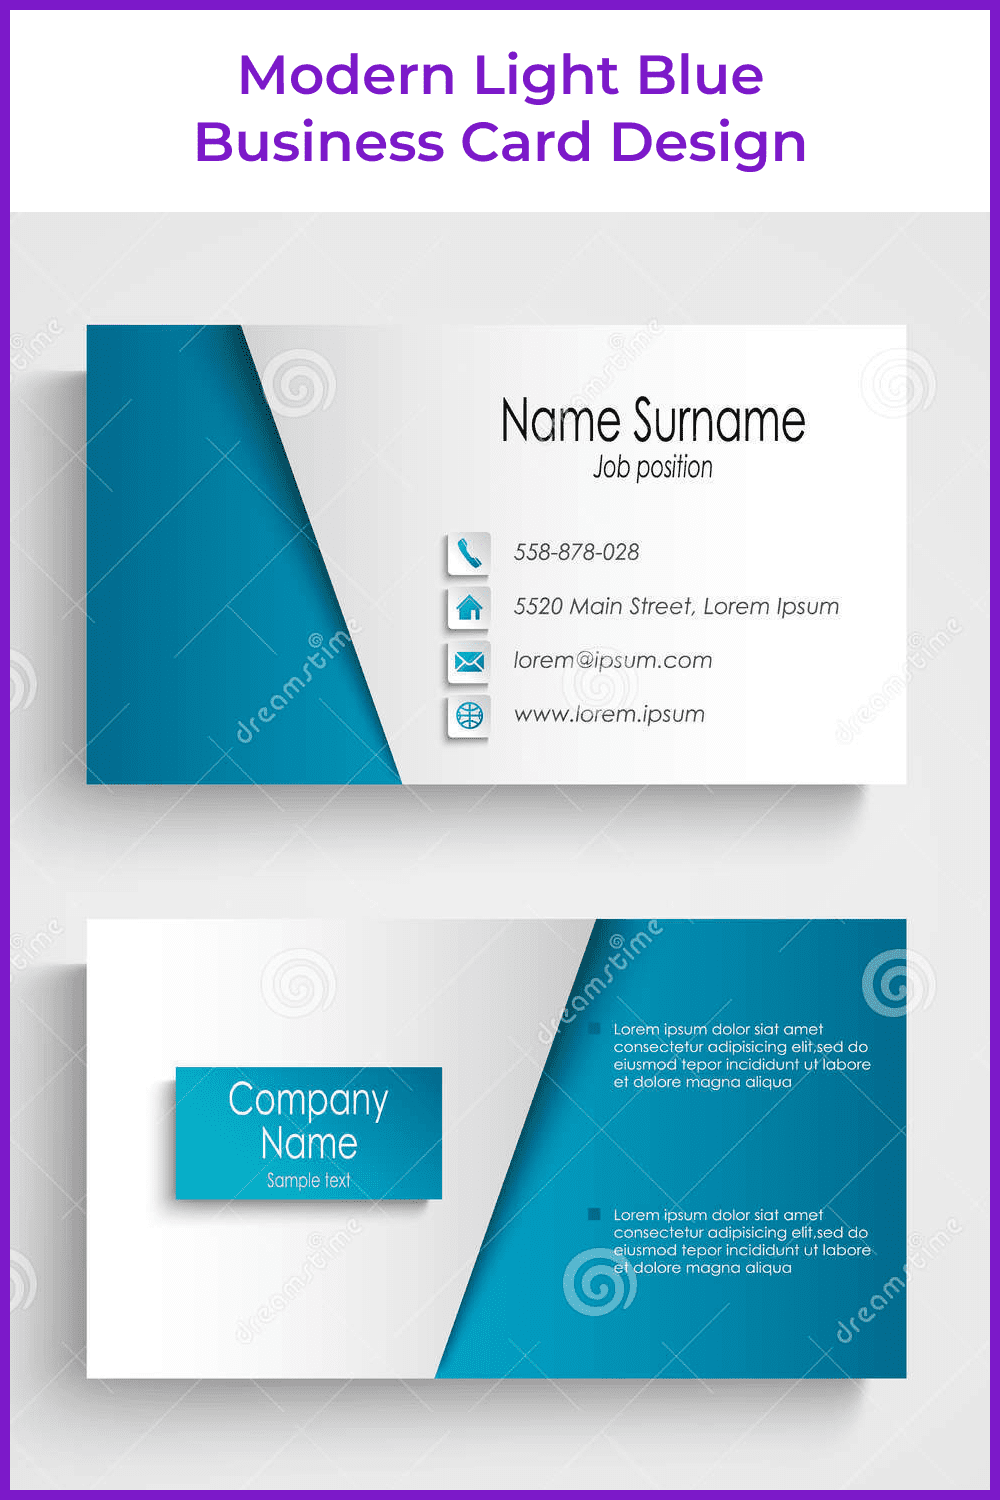 Simple and tasteful. White and blue card.